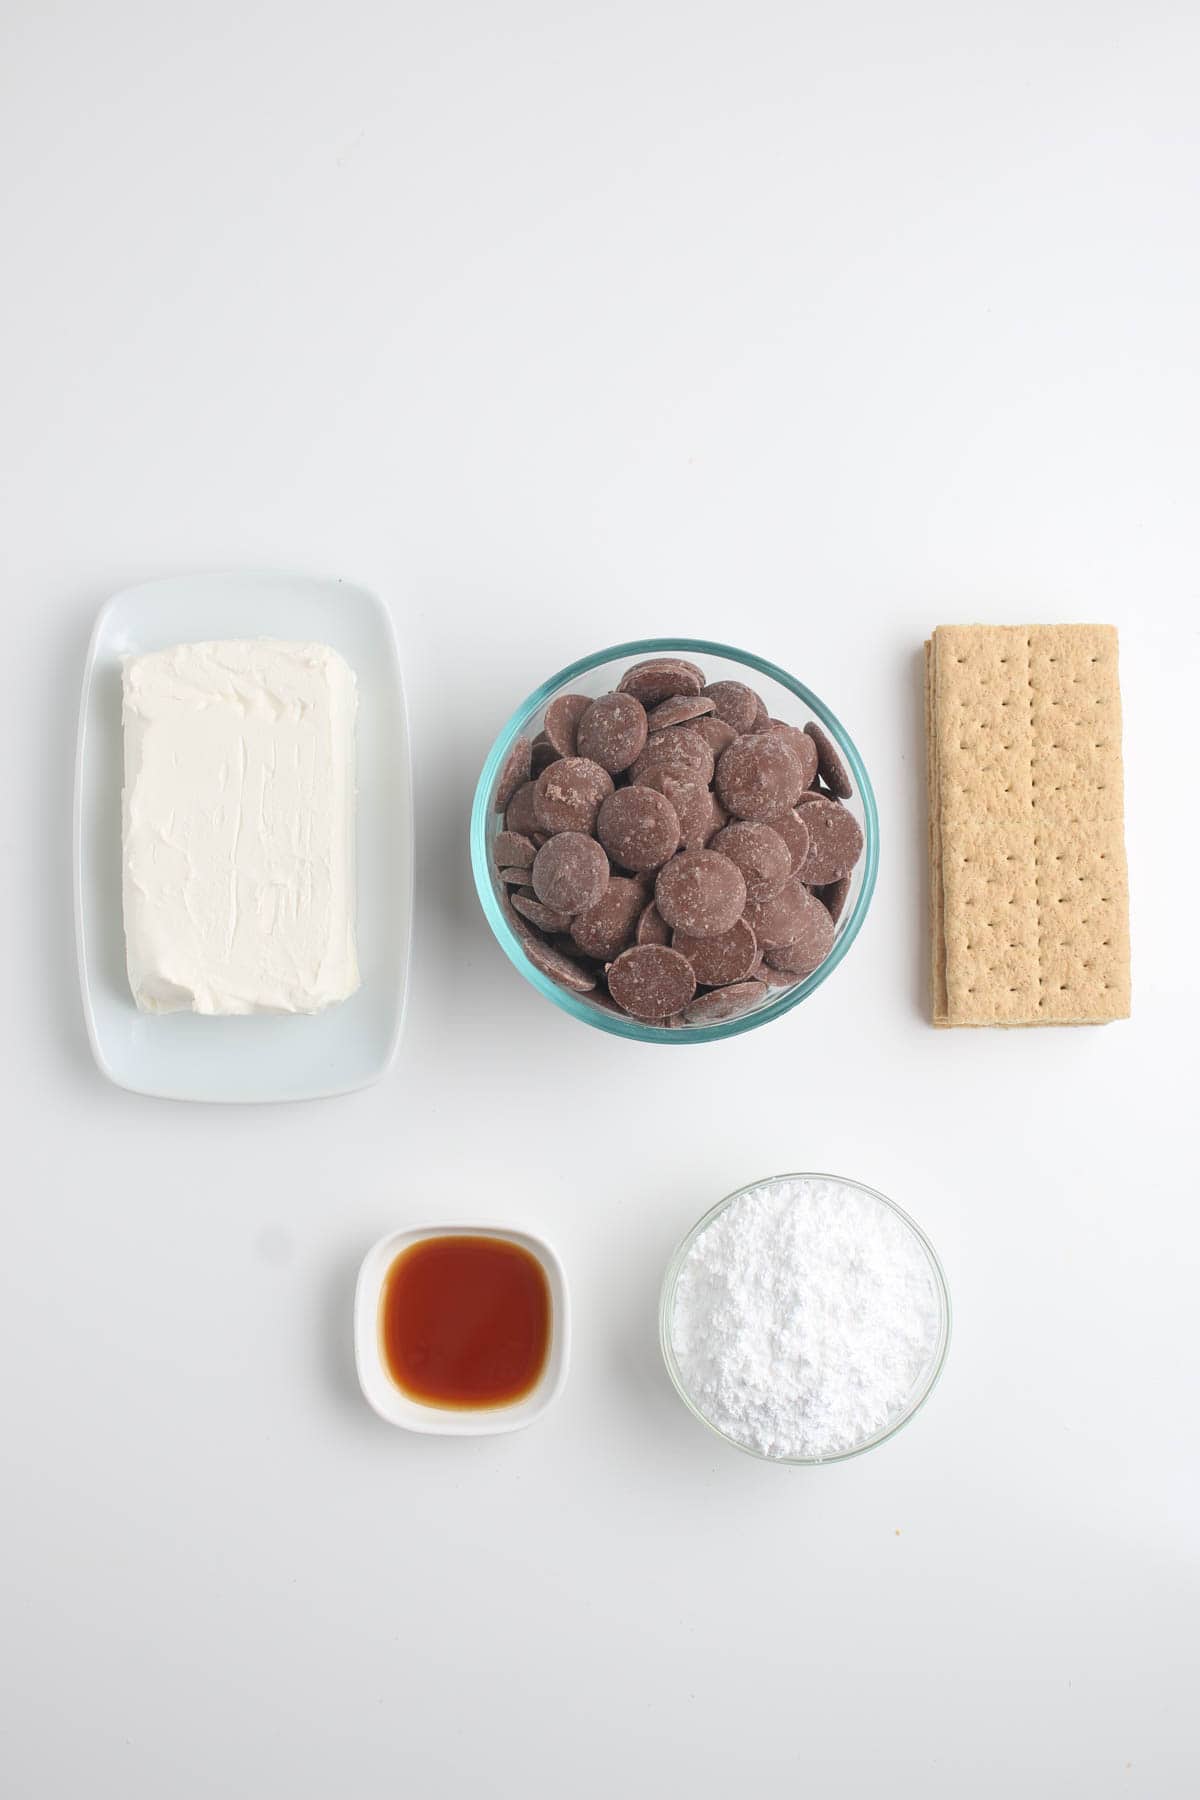 Ingredients for cheesecake truffles.